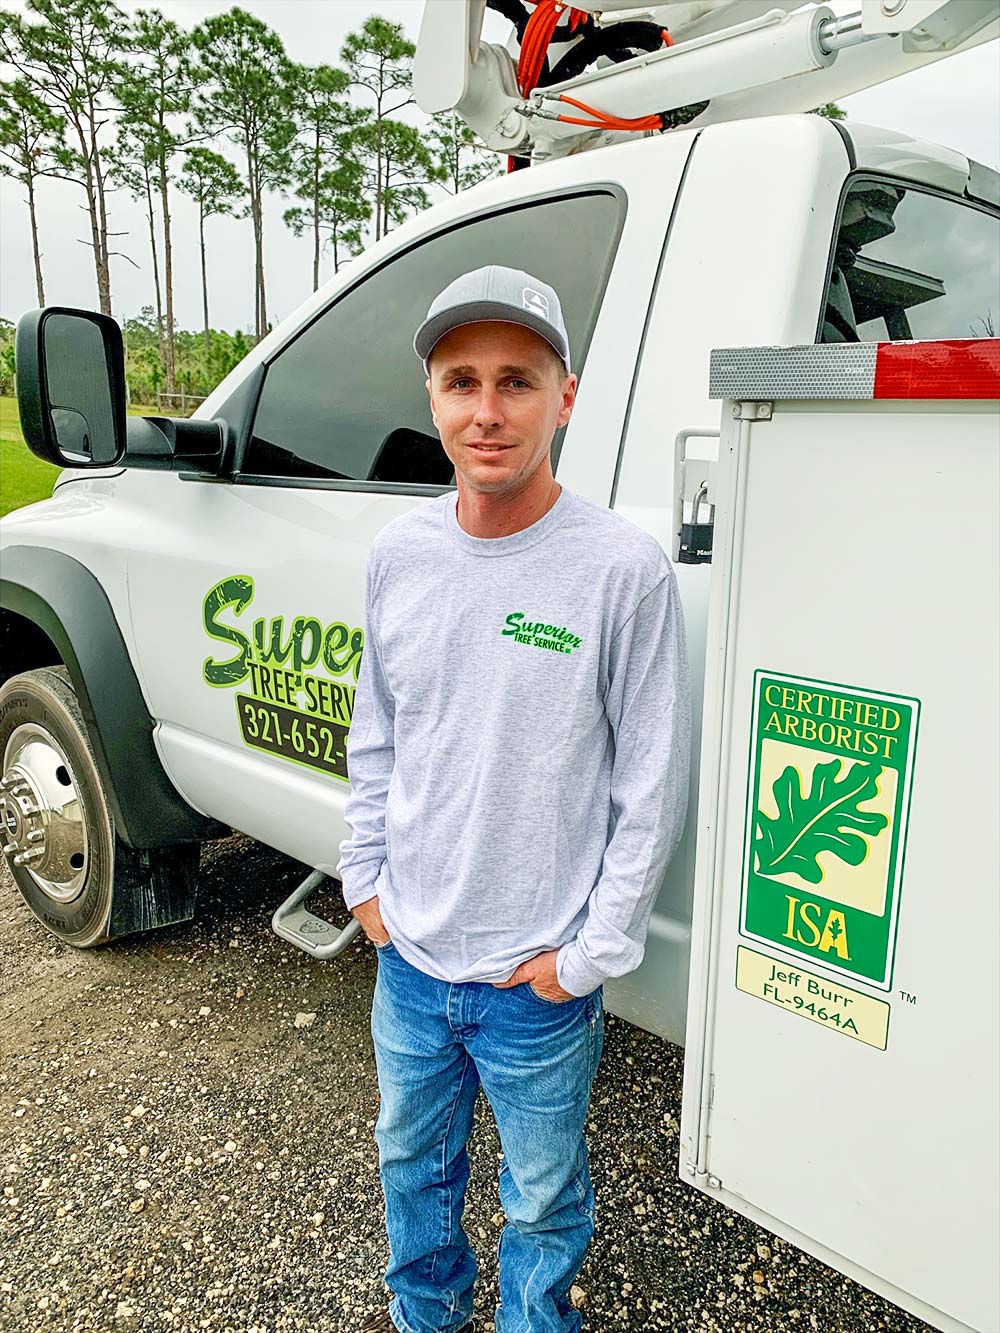 Superior Tree service is owned by an ISA-Certified Arborist